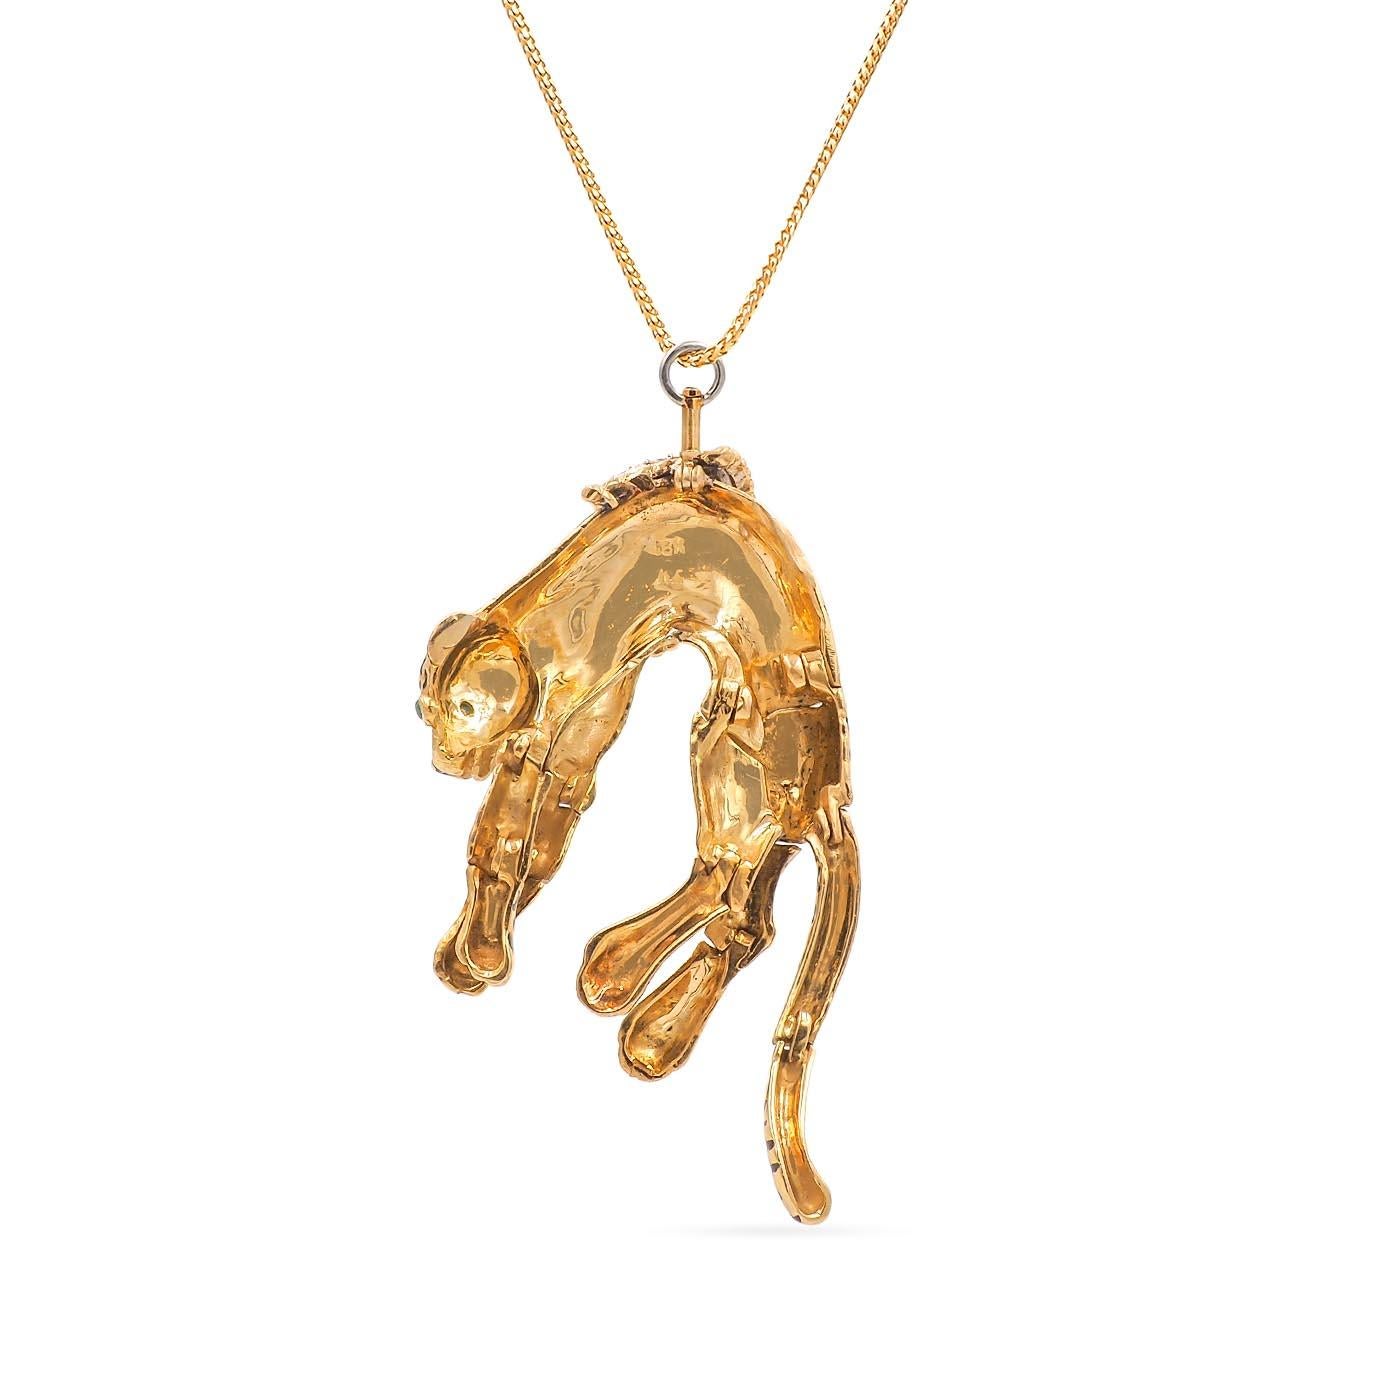 Vintage Panther Pendant Necklace composed of 18k yellow gold and platinum. The panther is laying draped over, with diamonds set at the center of the pendant, 16 Round Brilliant Cut diamonds weighing approximately 1.00 carats in total. With black